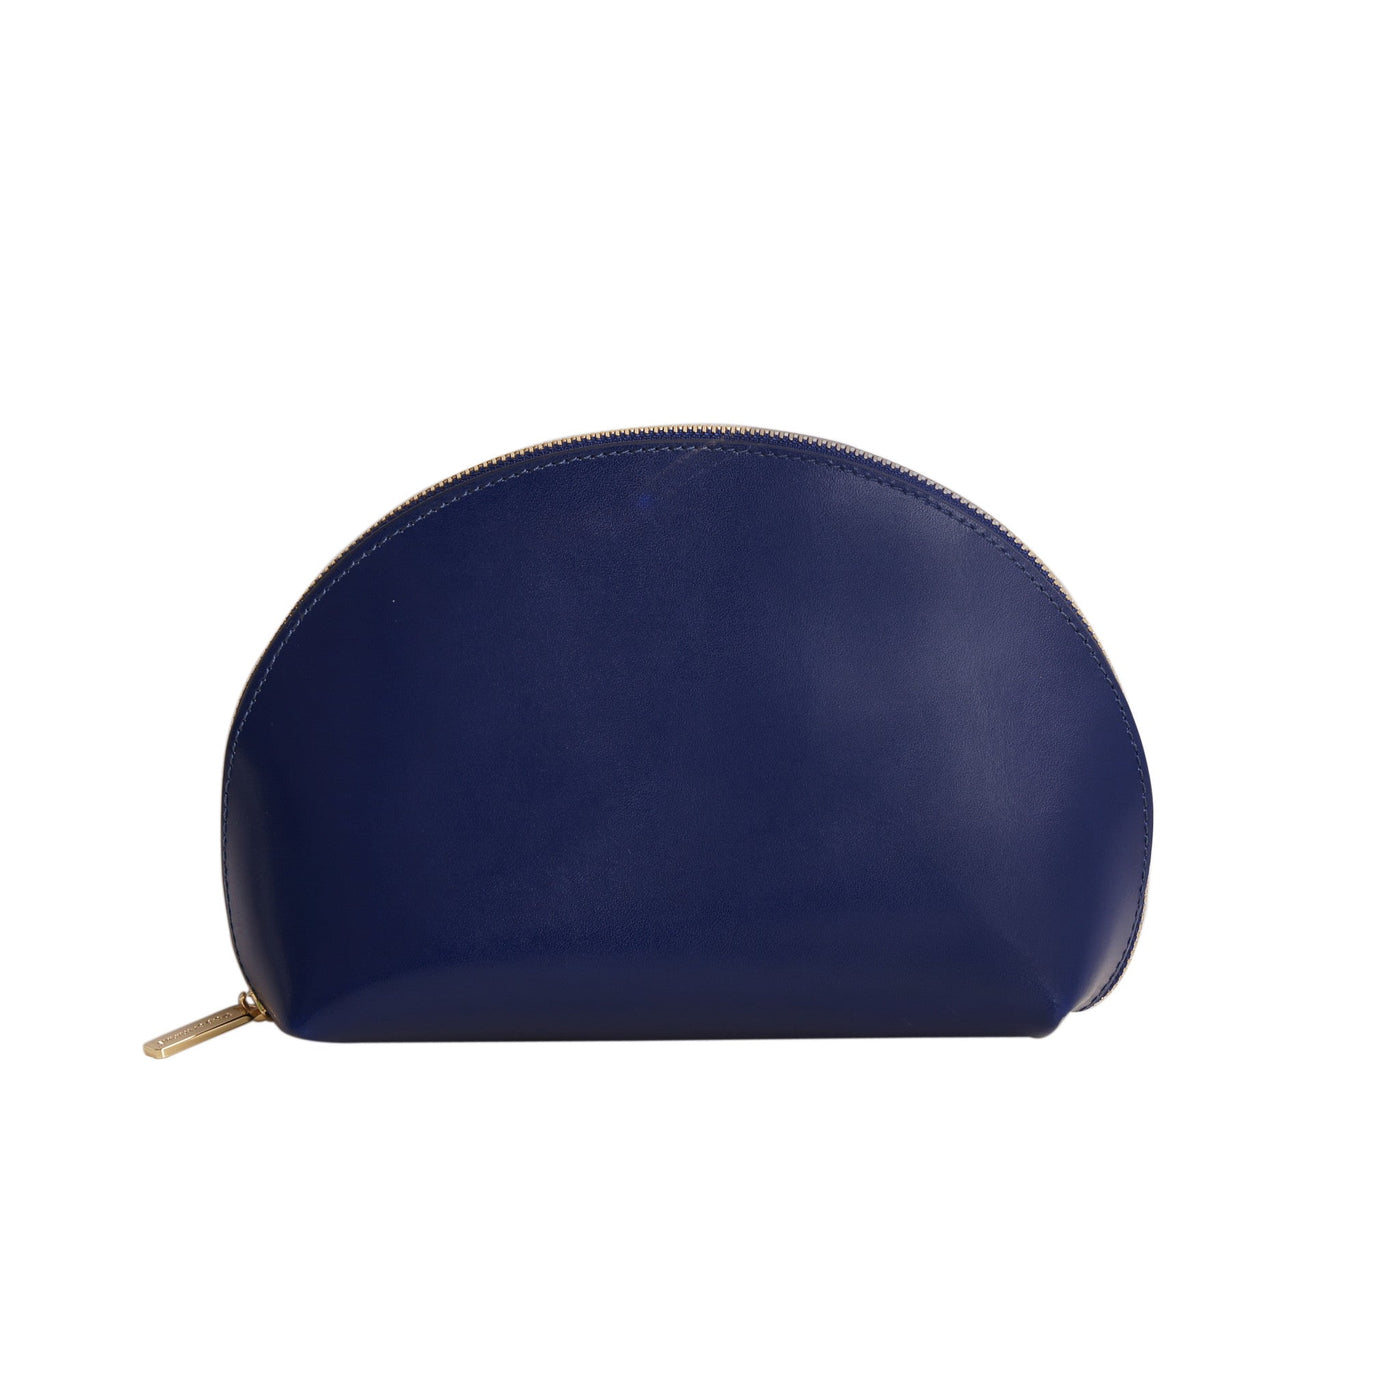 Paperthinks Recycled Leather Cosmetics Pouch - Navy Blue - Paperthinks.us